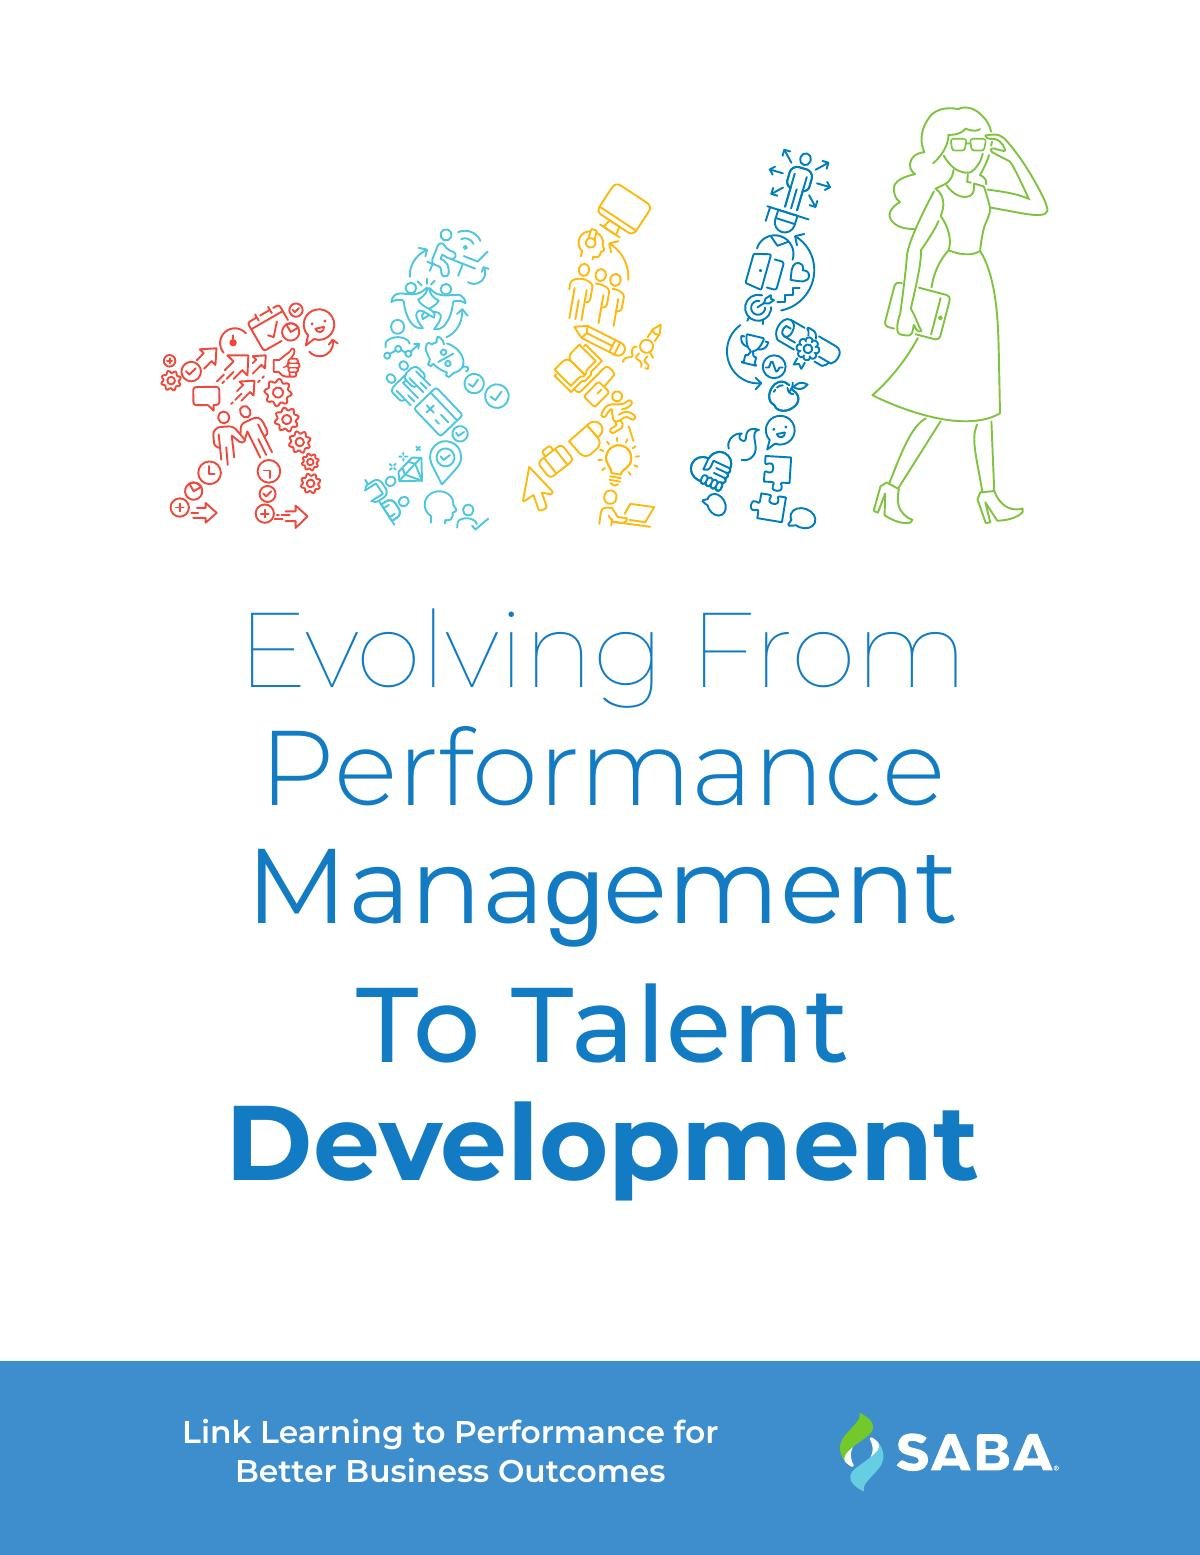 Evolving from Performance Management to Talent Development